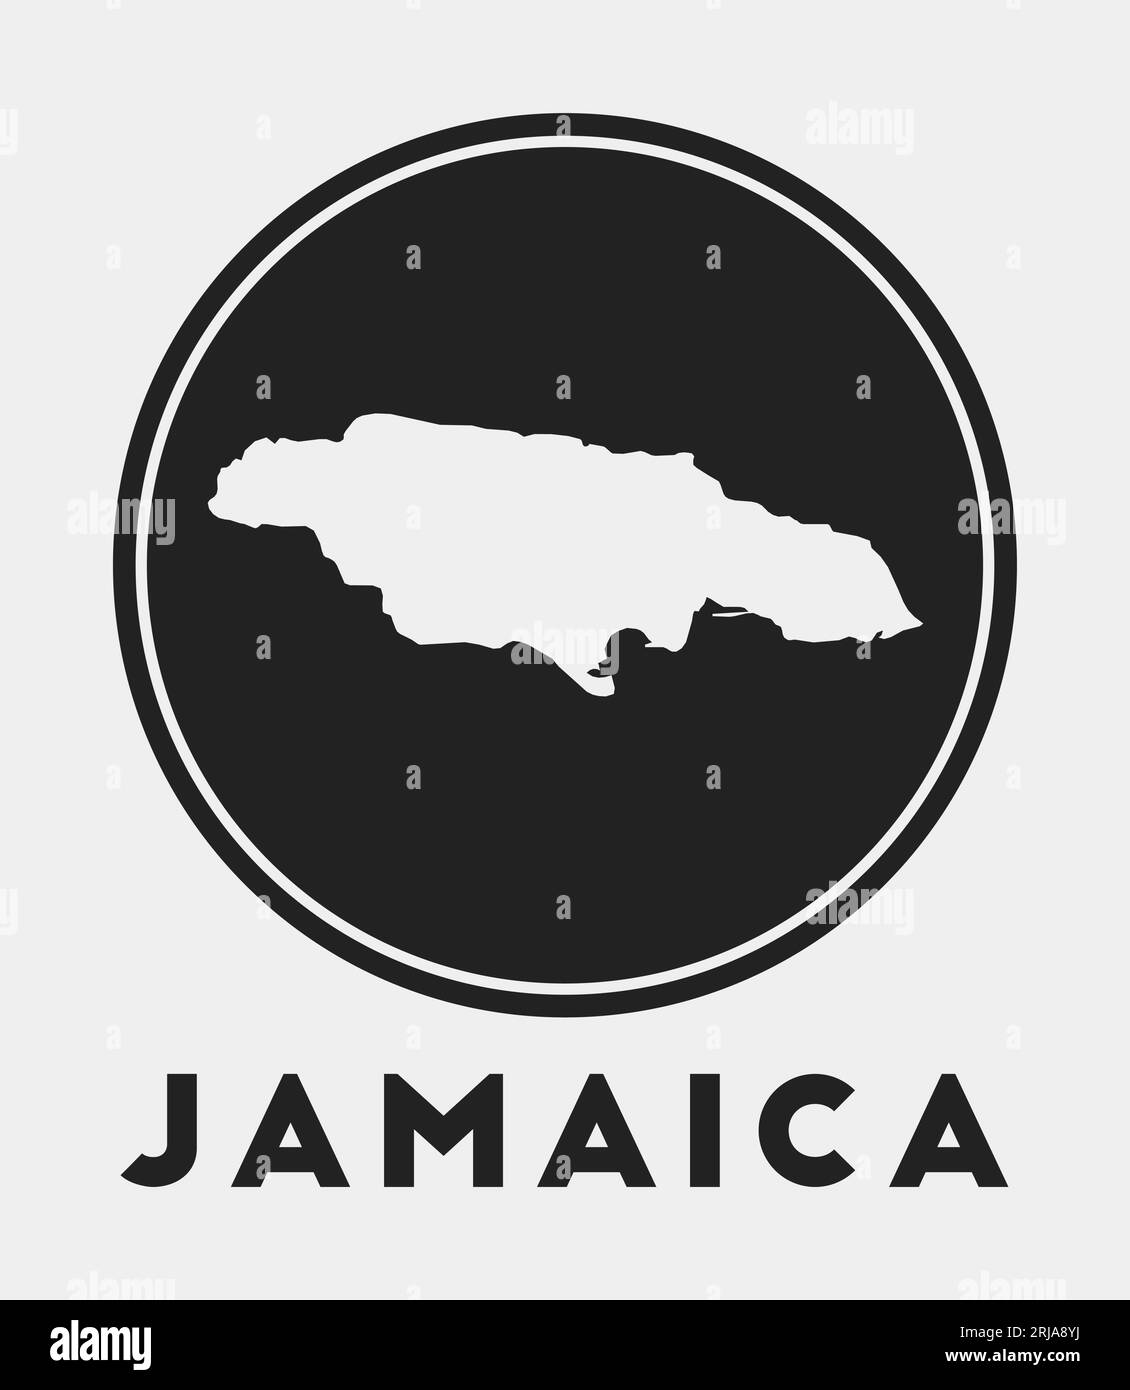 Jamaica icon. Round logo with country map and title. Stylish Jamaica ...